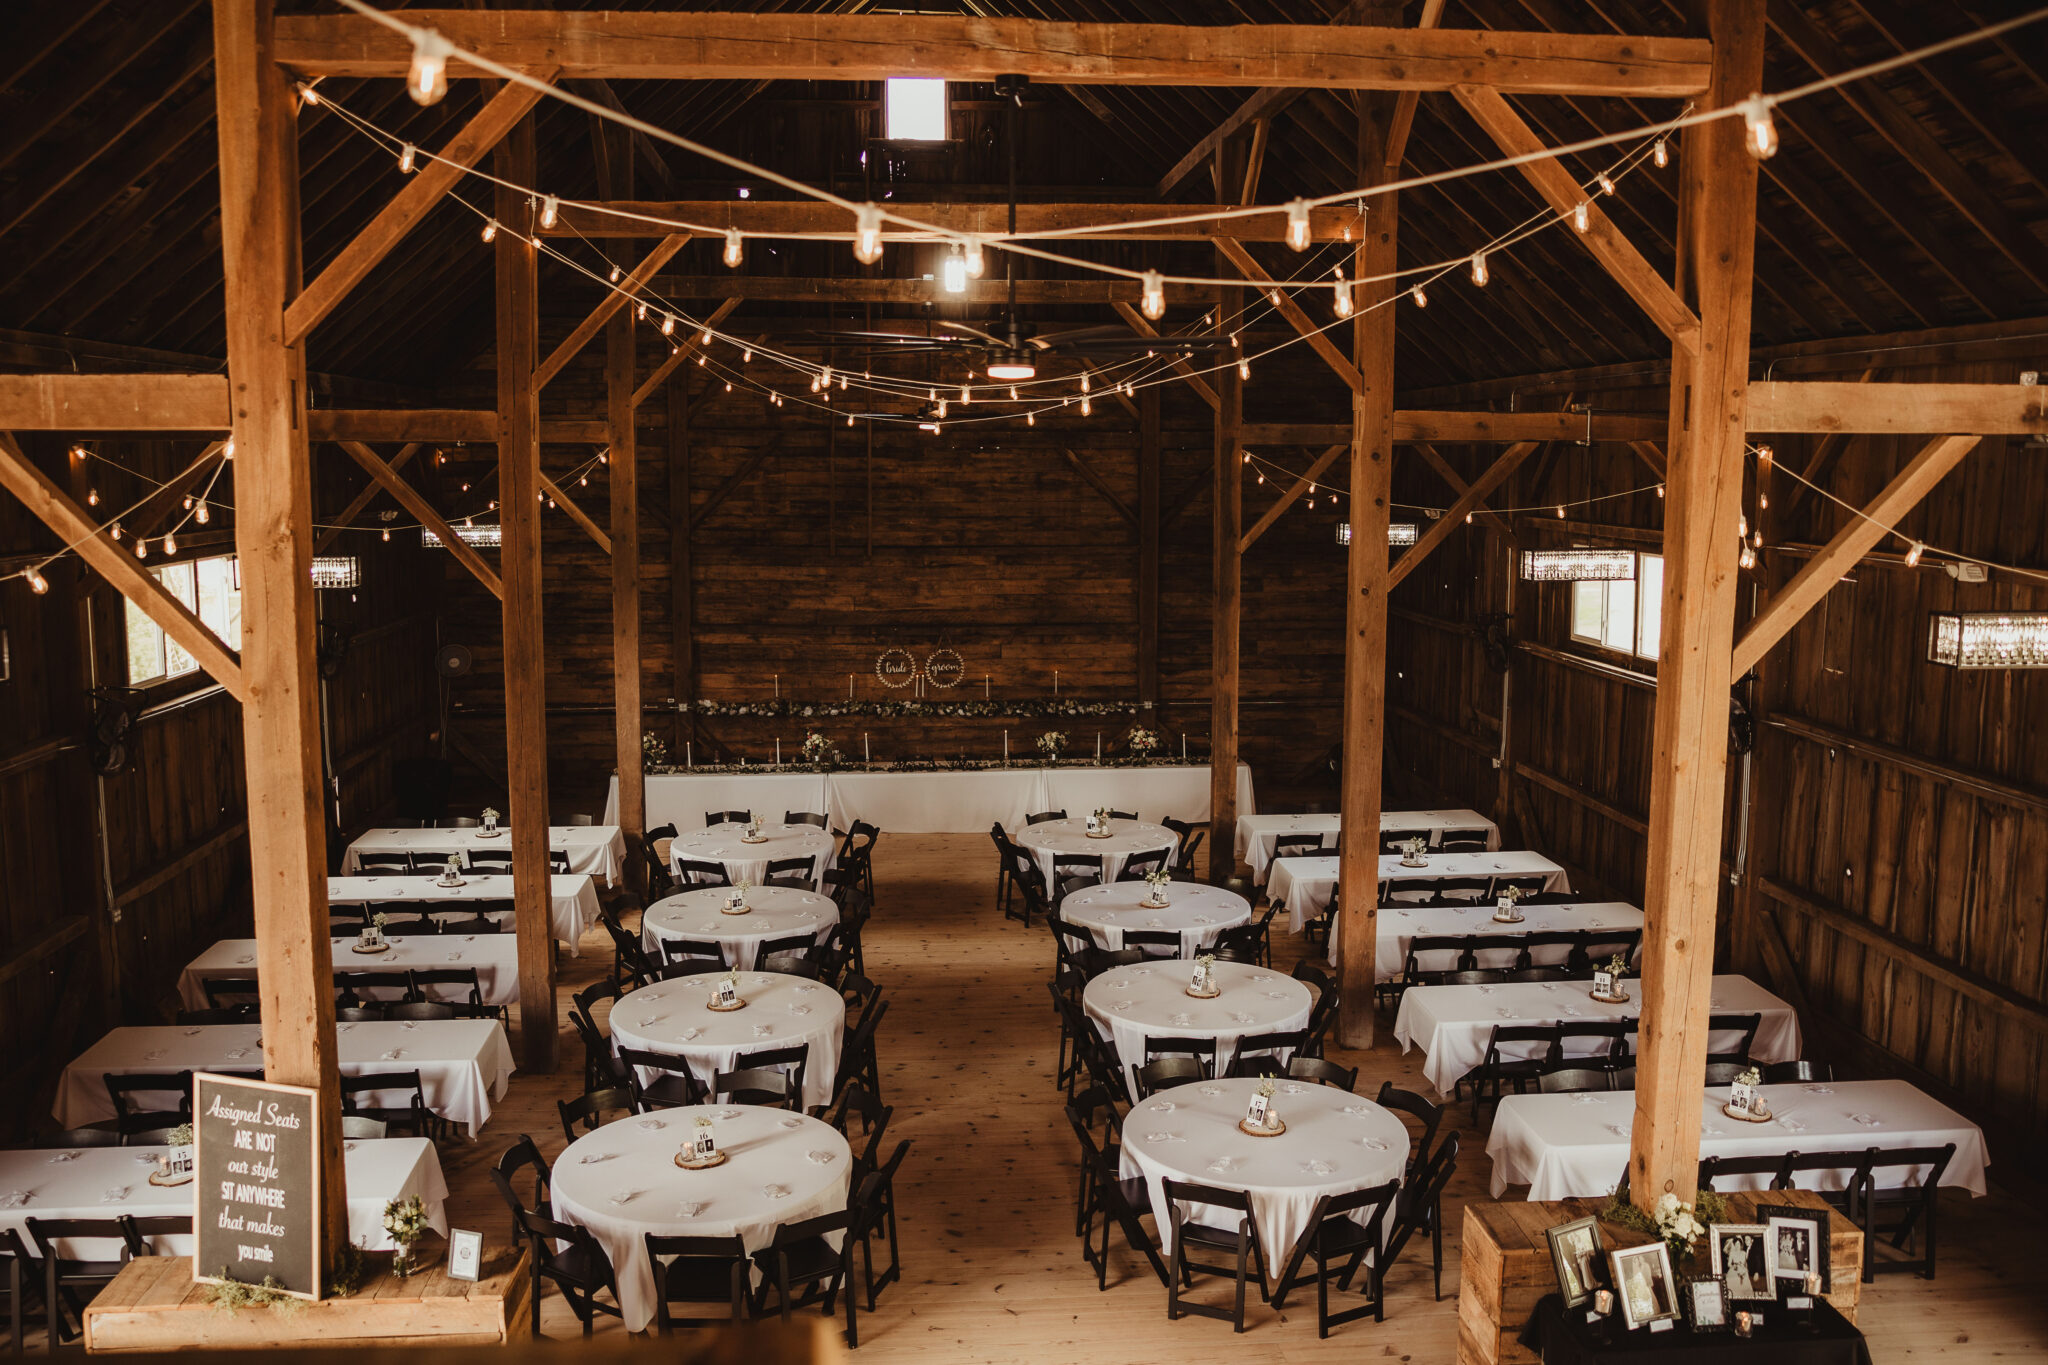 A rustic barn interior viewed from a balcony, adorned with charming hanging lights.